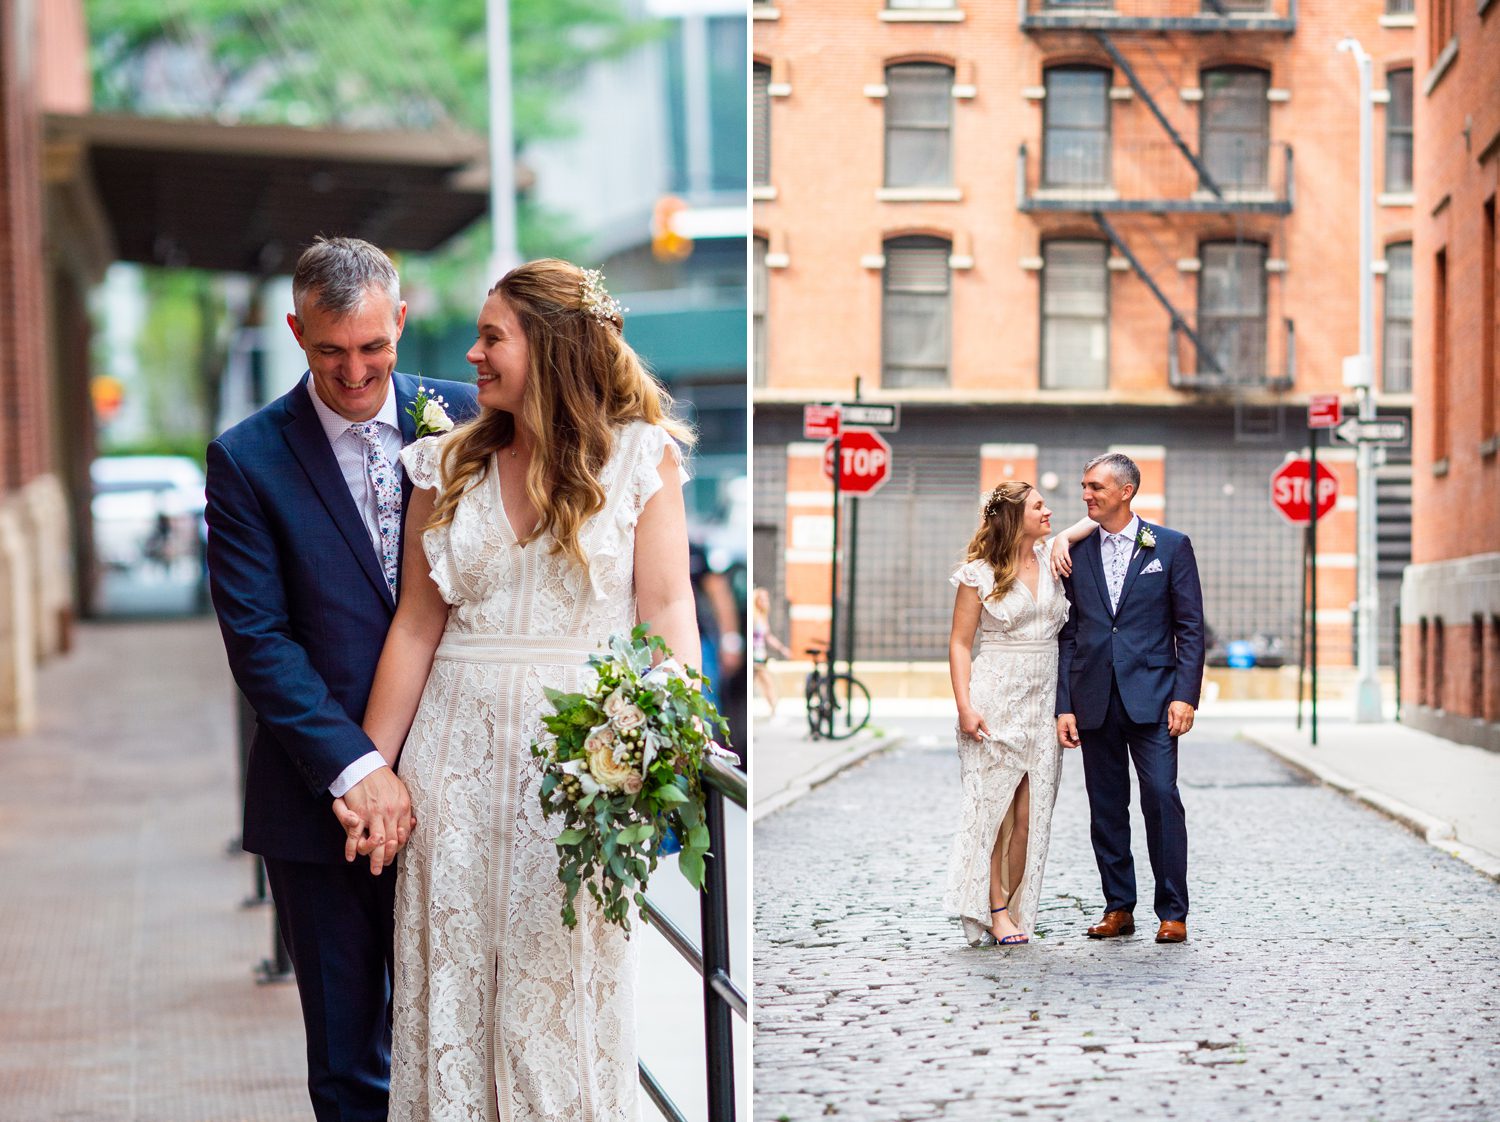 Bride and Groom eloping in NYC